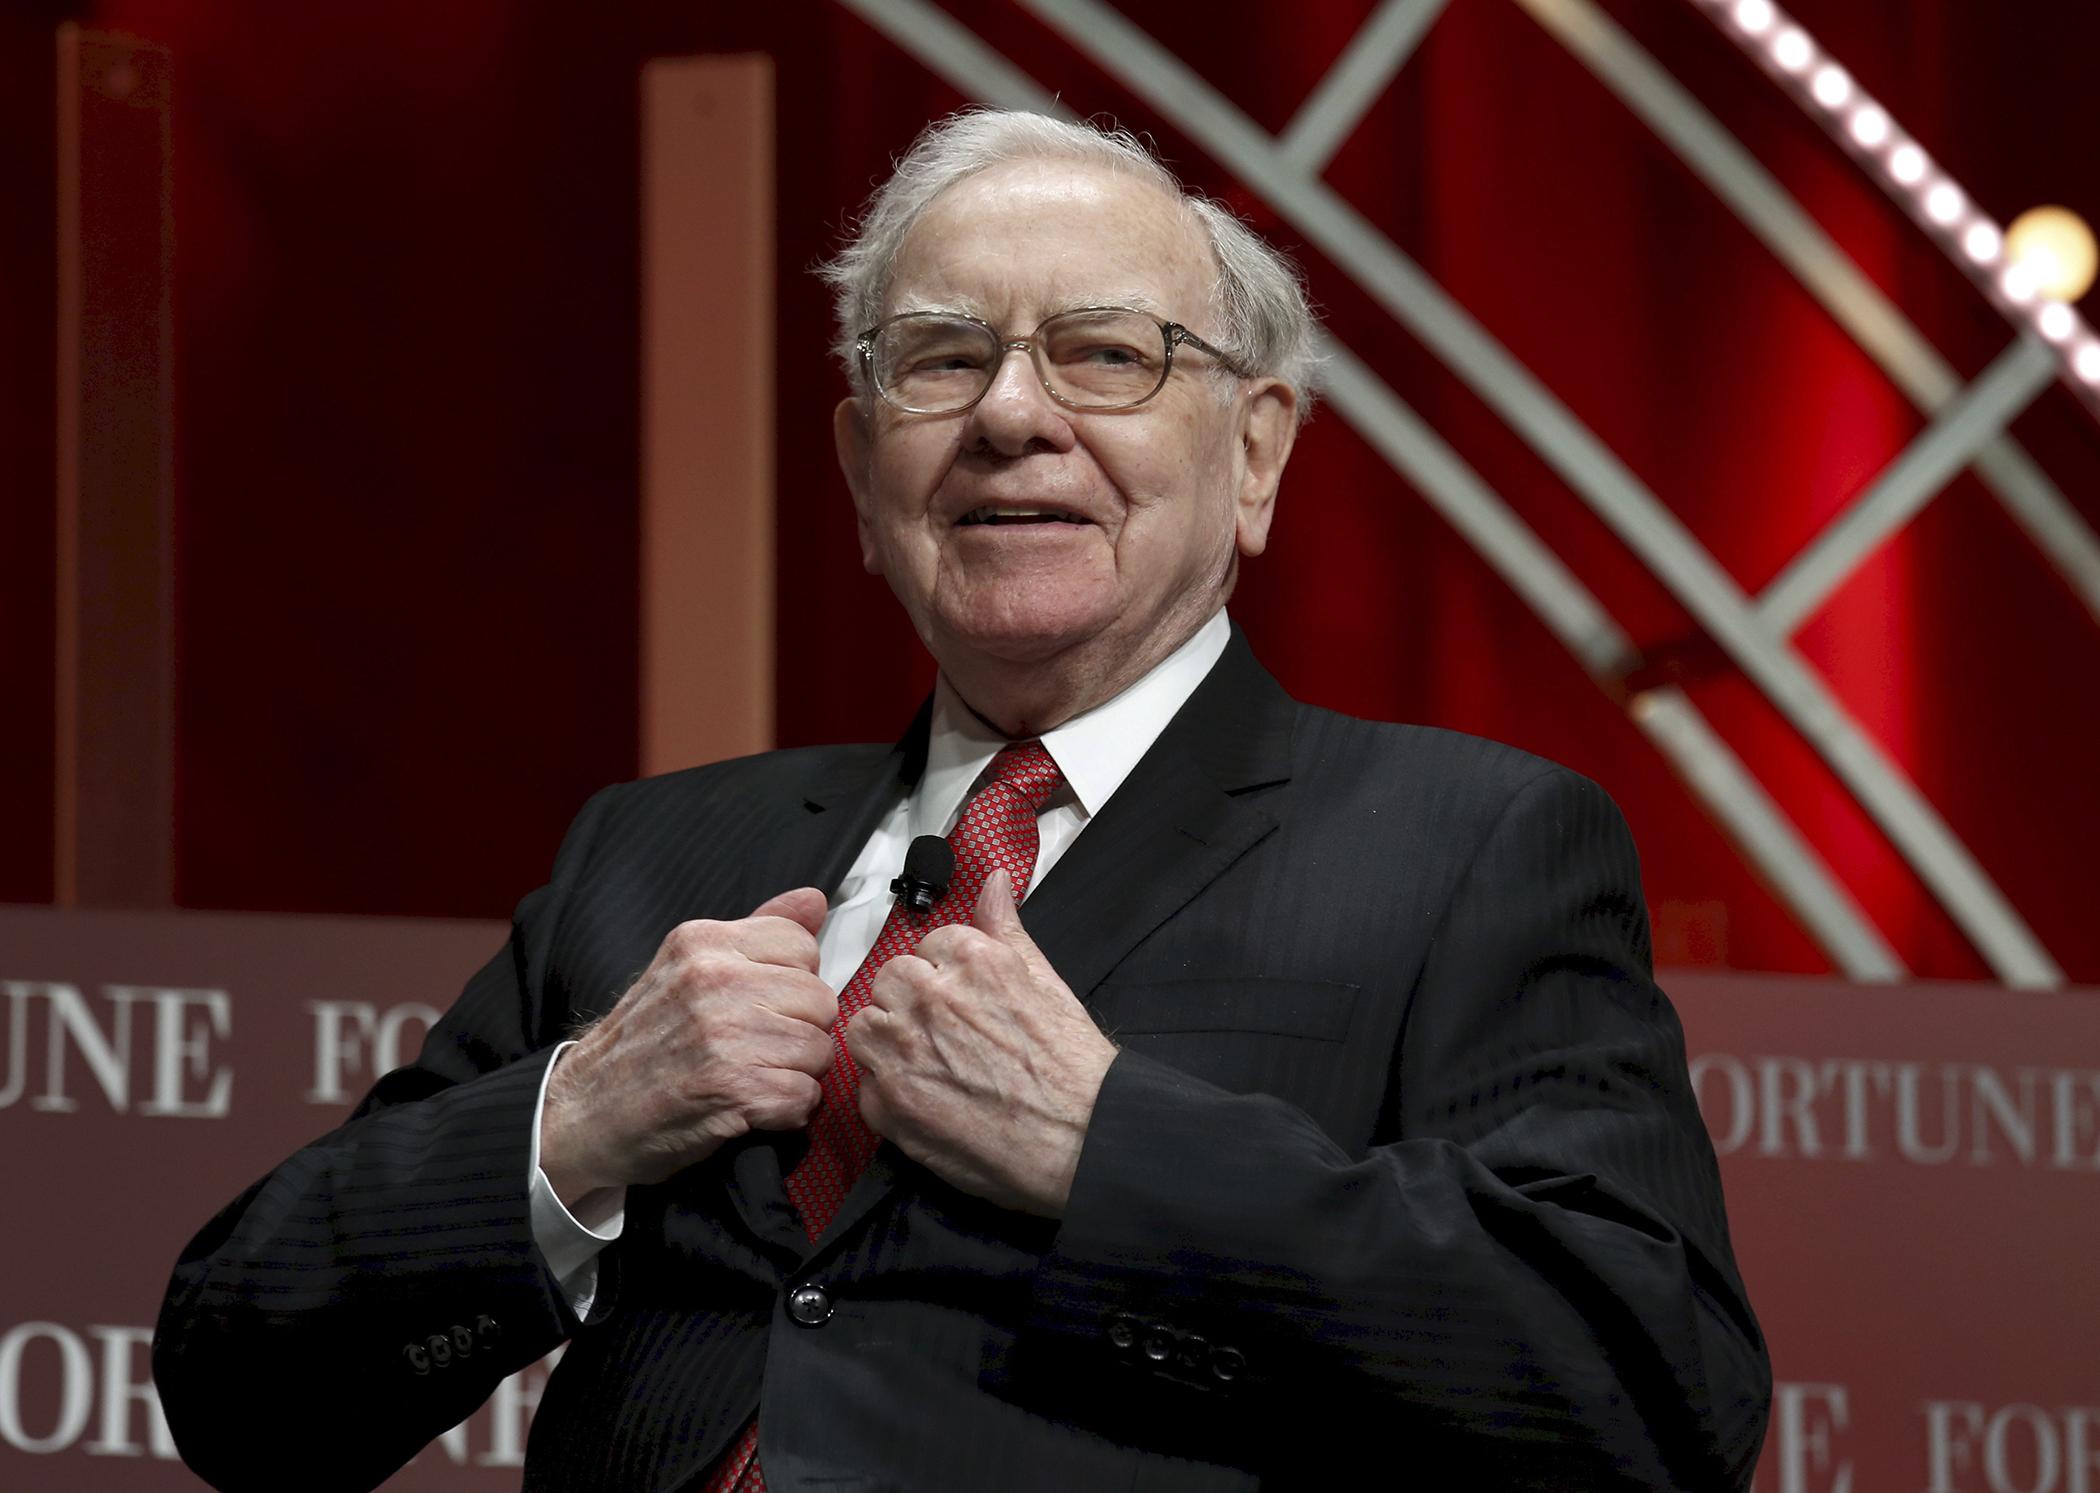 Warren Buffett, chairman and CEO of Berkshire Hathaway, takes his seat to speak at the Fortune's Most Powerful Women's Summit in Washington October 13, 2015.